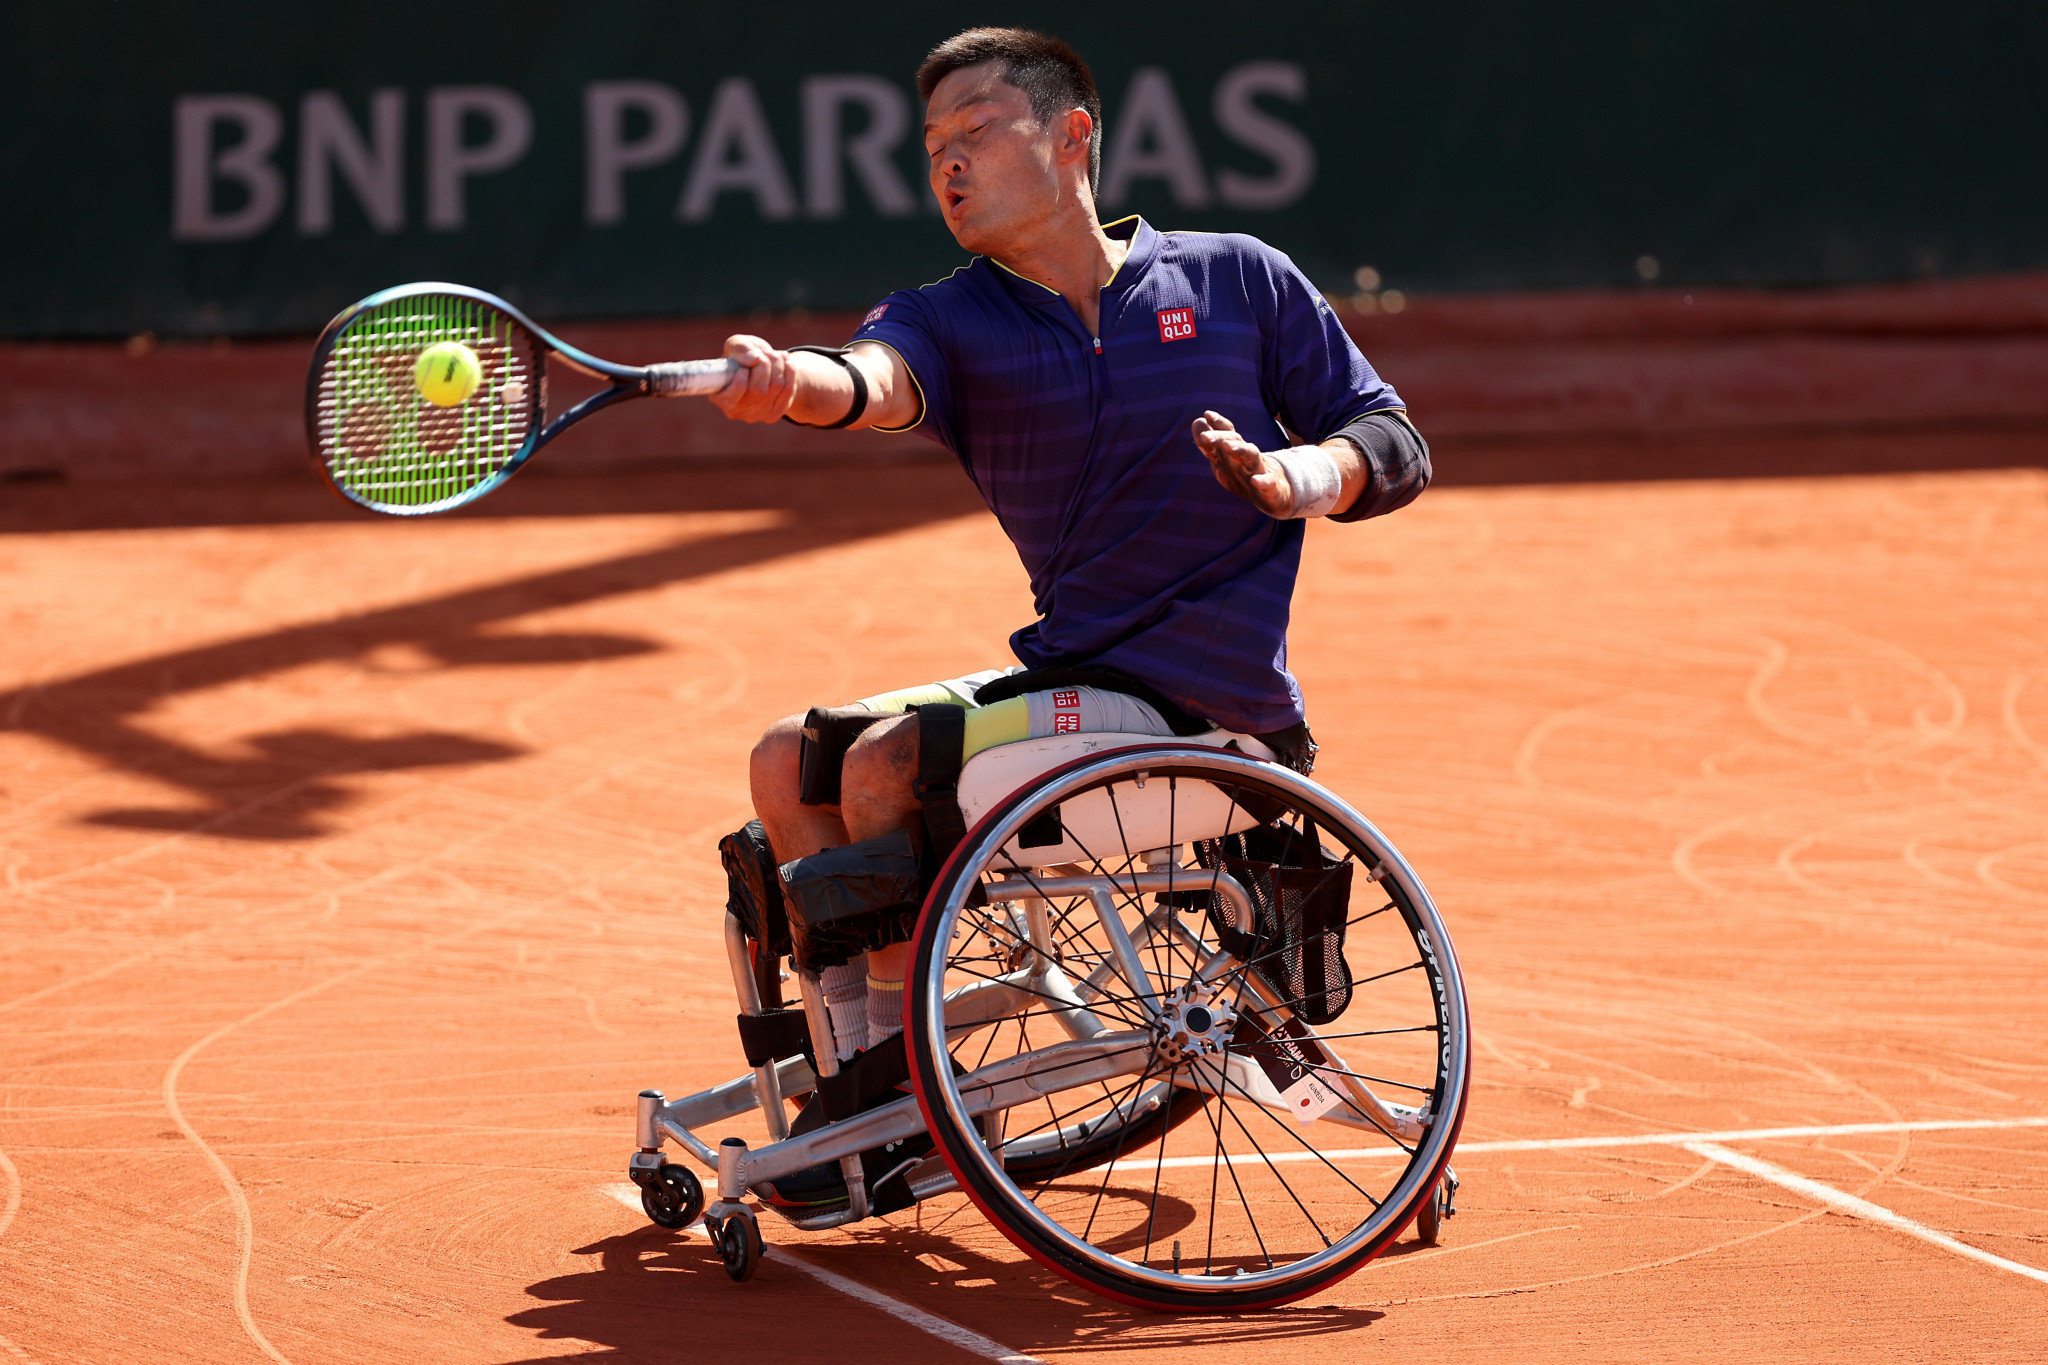 Kunieda closes in on eighth French Open title after thrashing Oda